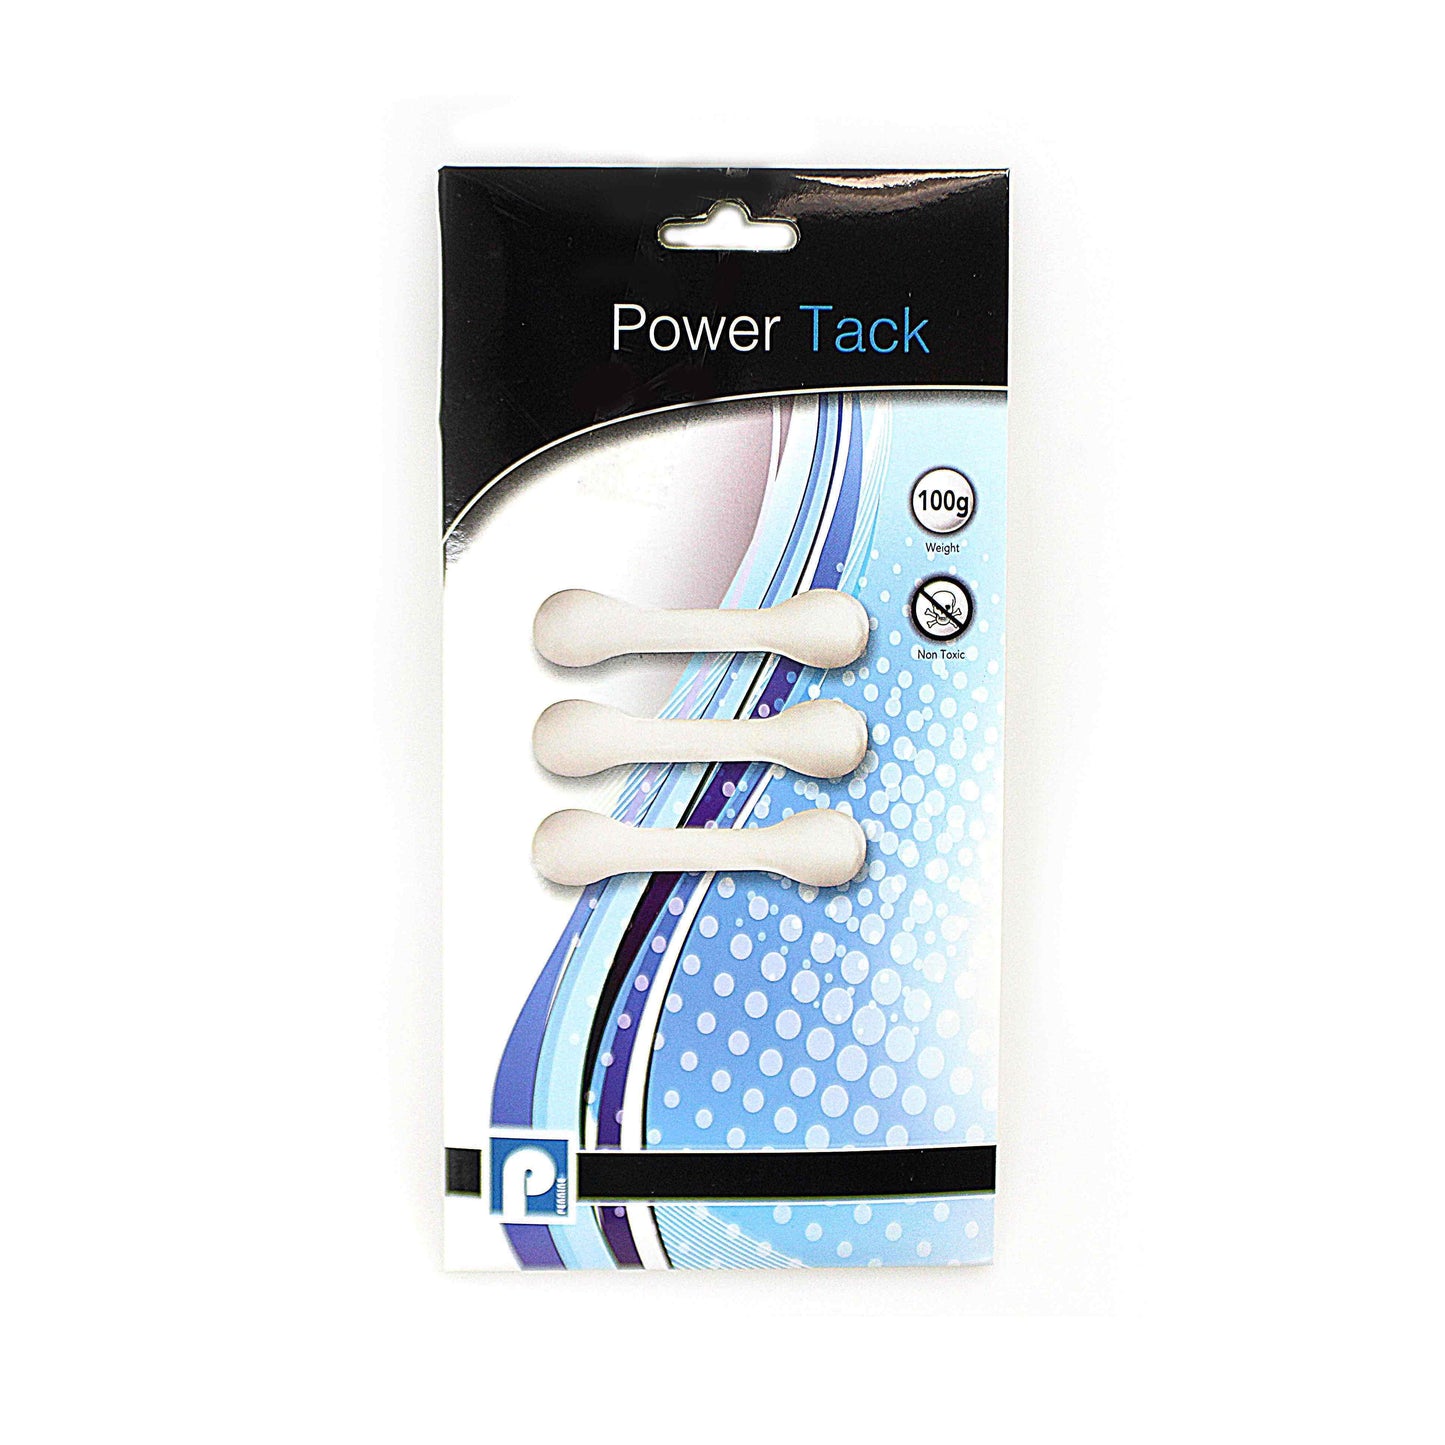 100g White Power Tack Non Toxic Home Arts And Craft P2349 (Large Letter Rate)